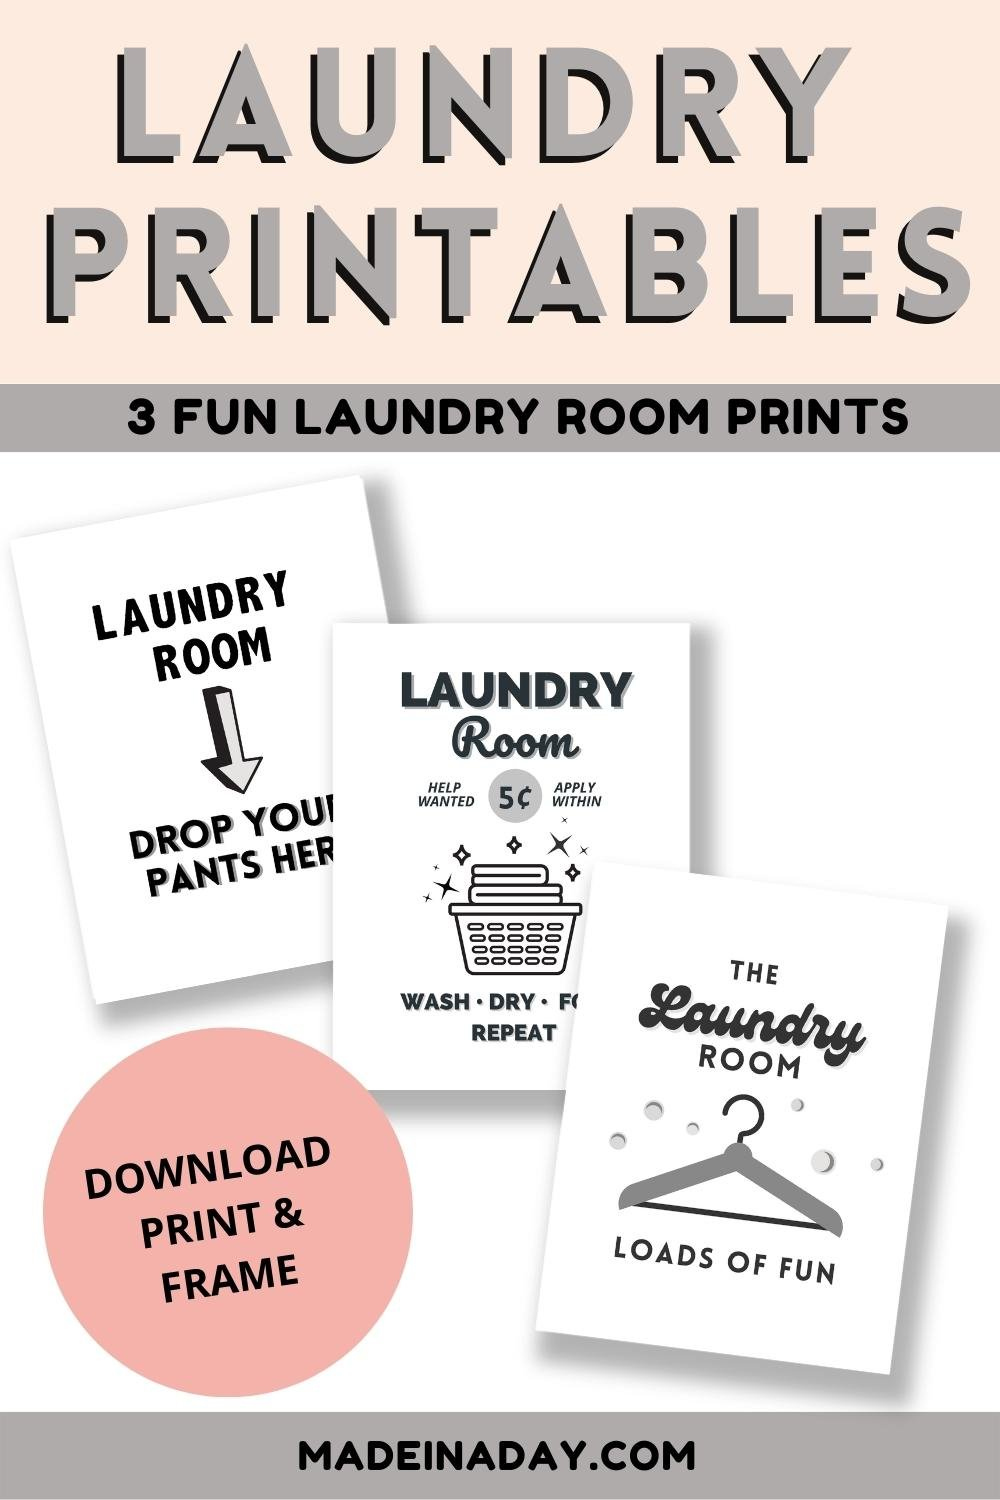 Free Printable Laundry Room Signs | Made In A Day pertaining to Free Printable Laundry Room Signs